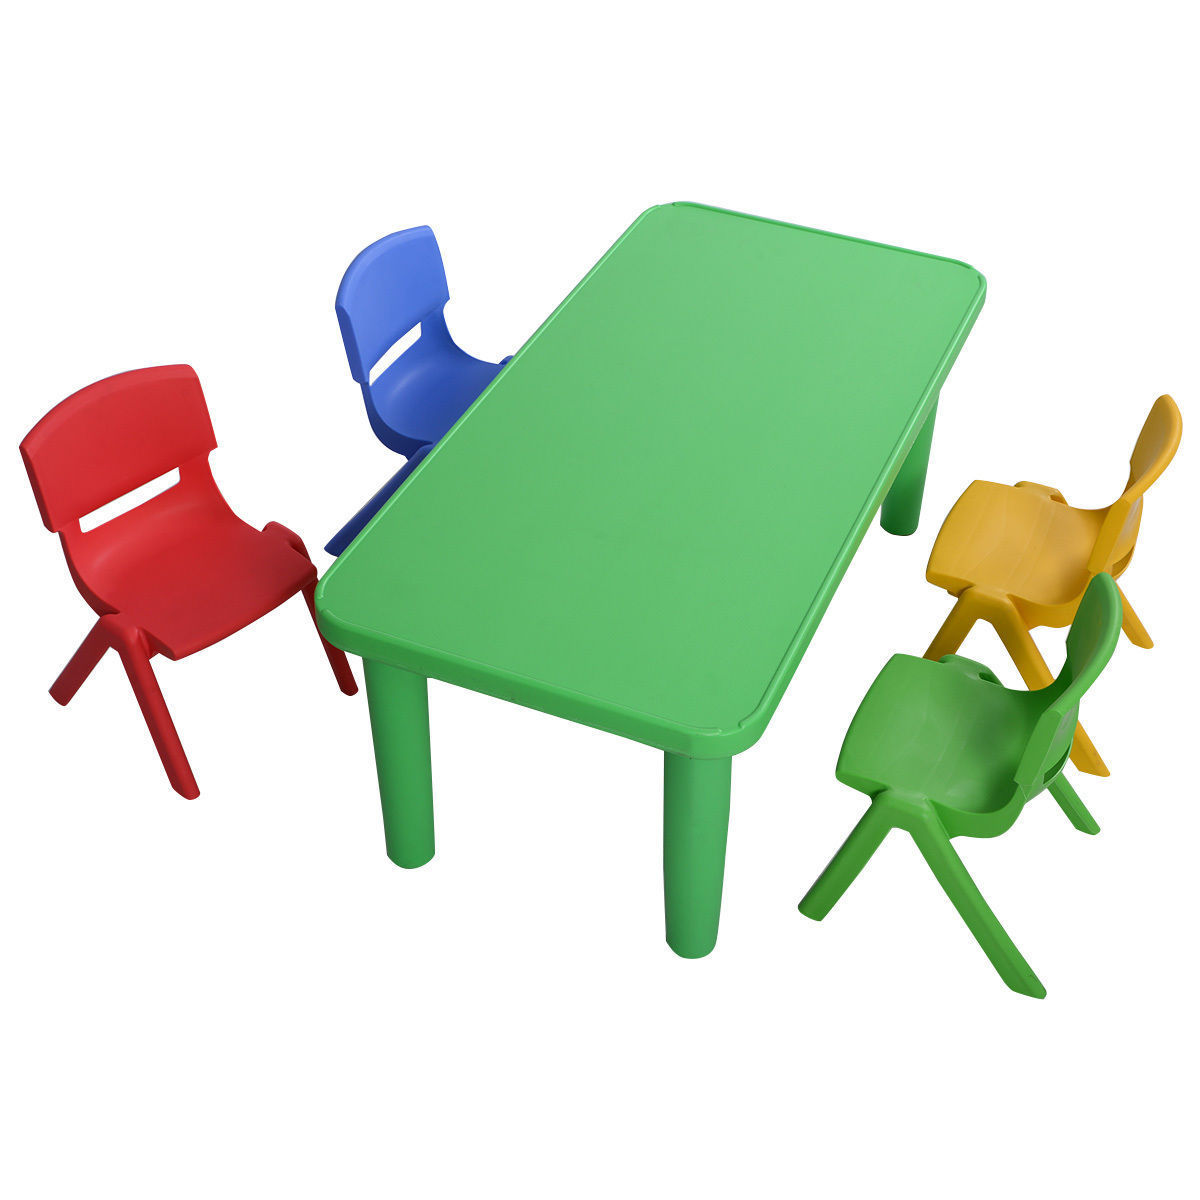 Kids Plastic Table And 4 Chairs Set Play School Home Fun Furniture ...